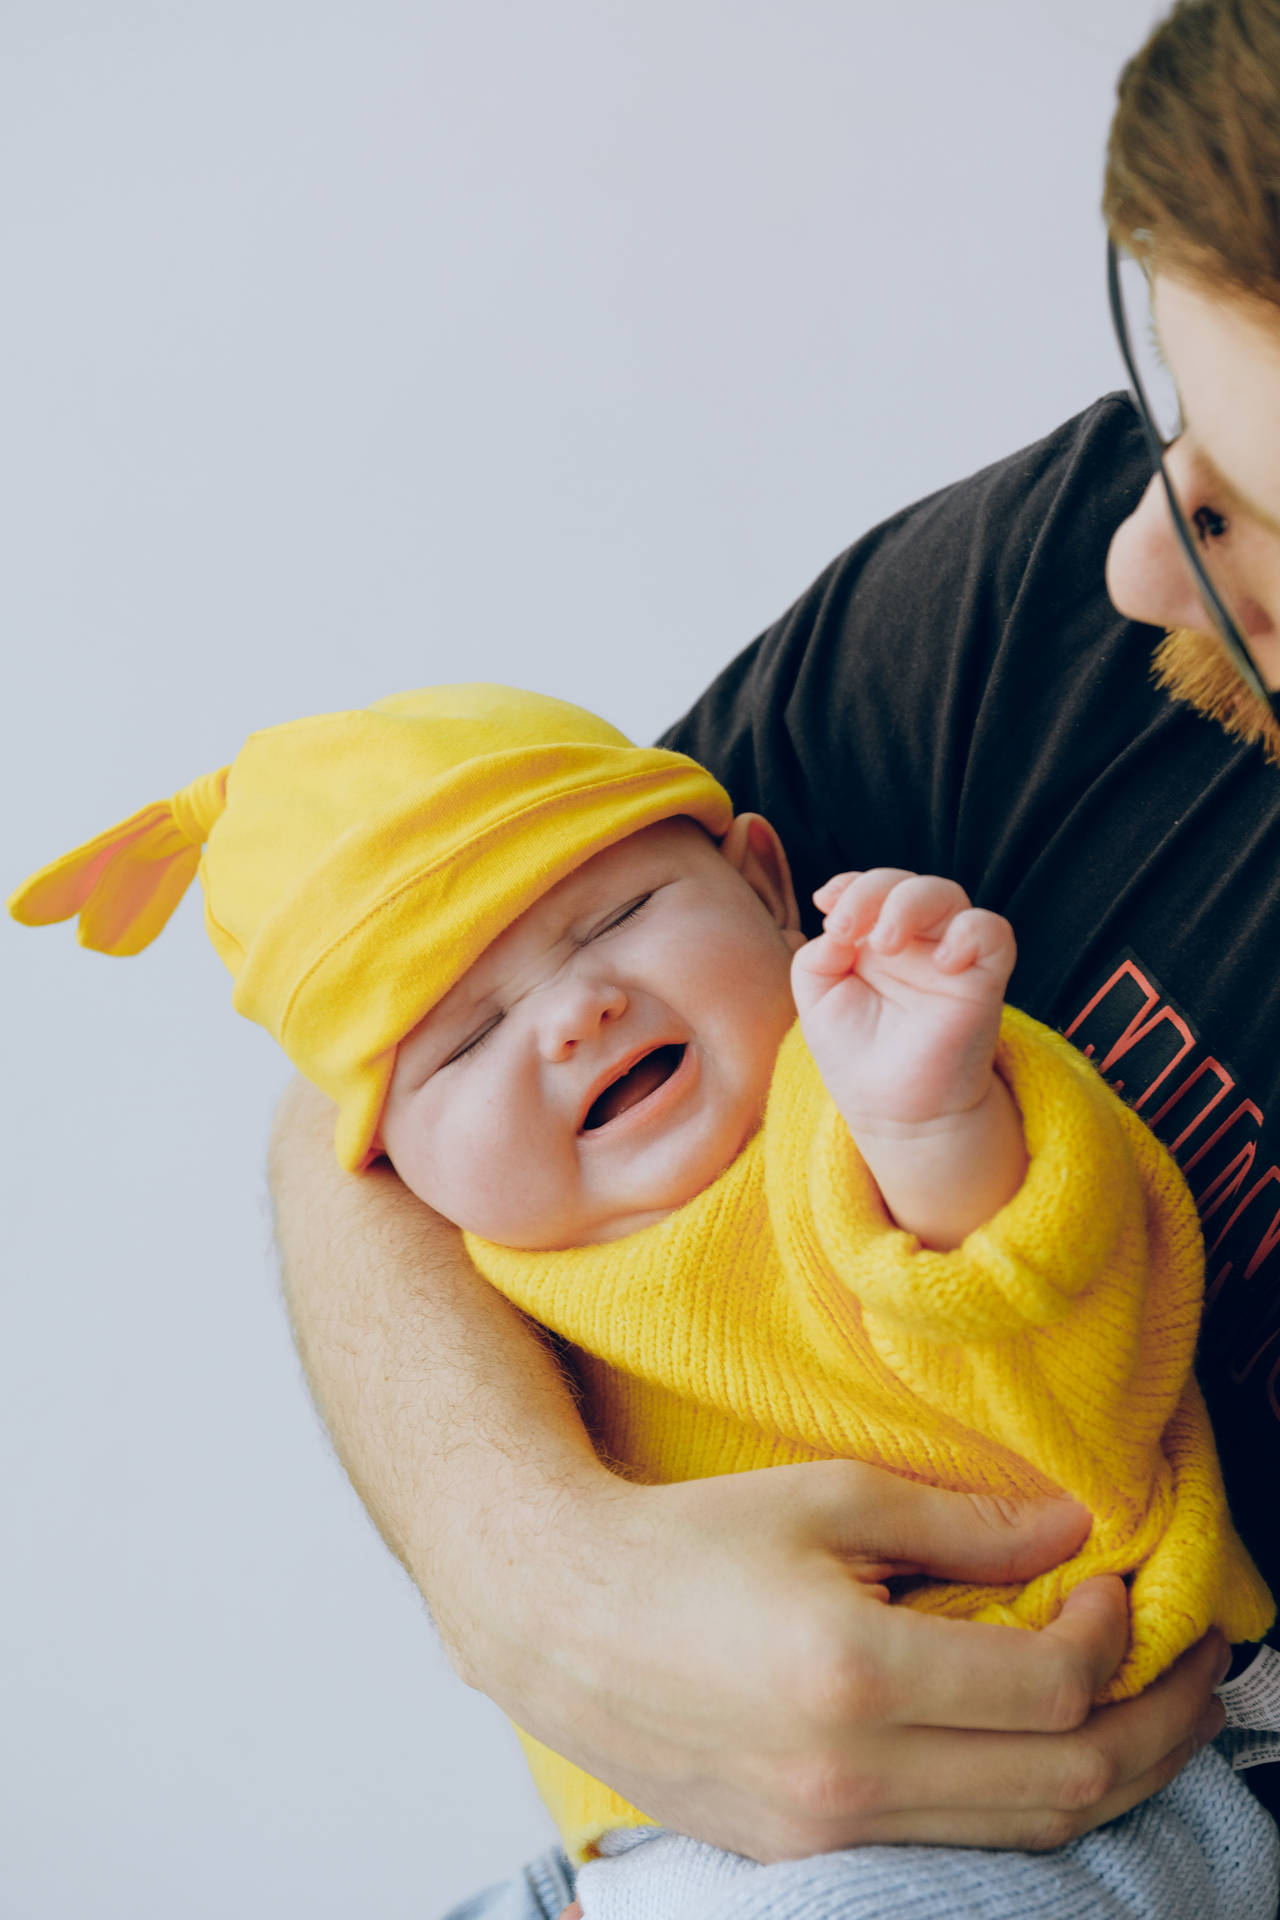 Cute Crying Baby In Yellow Outfit